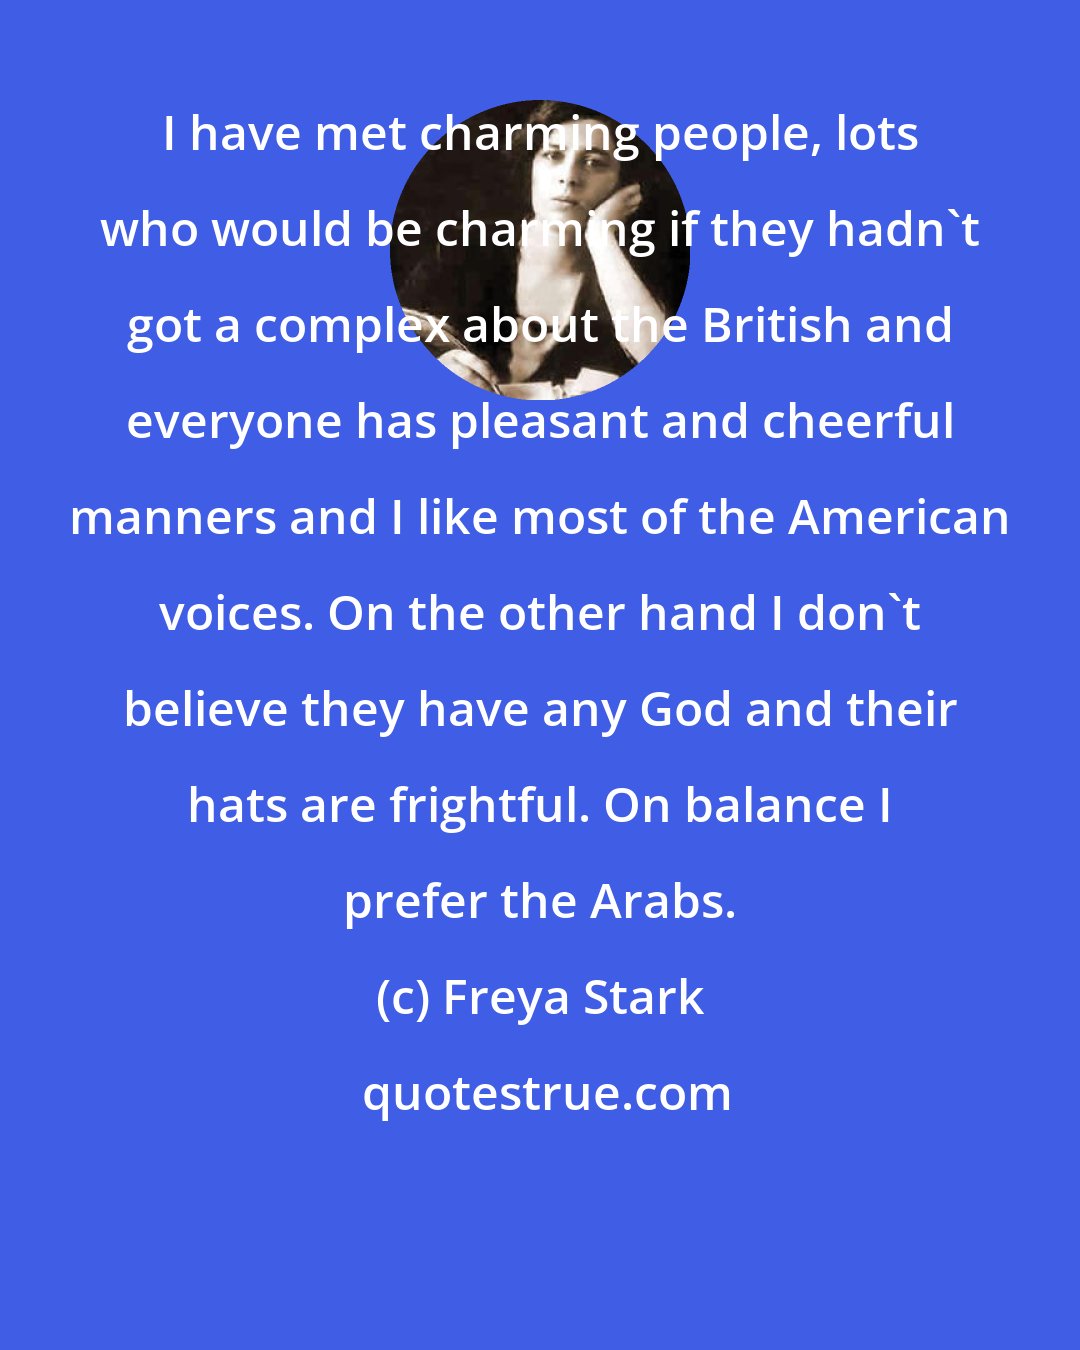 Freya Stark: I have met charming people, lots who would be charming if they hadn't got a complex about the British and everyone has pleasant and cheerful manners and I like most of the American voices. On the other hand I don't believe they have any God and their hats are frightful. On balance I prefer the Arabs.